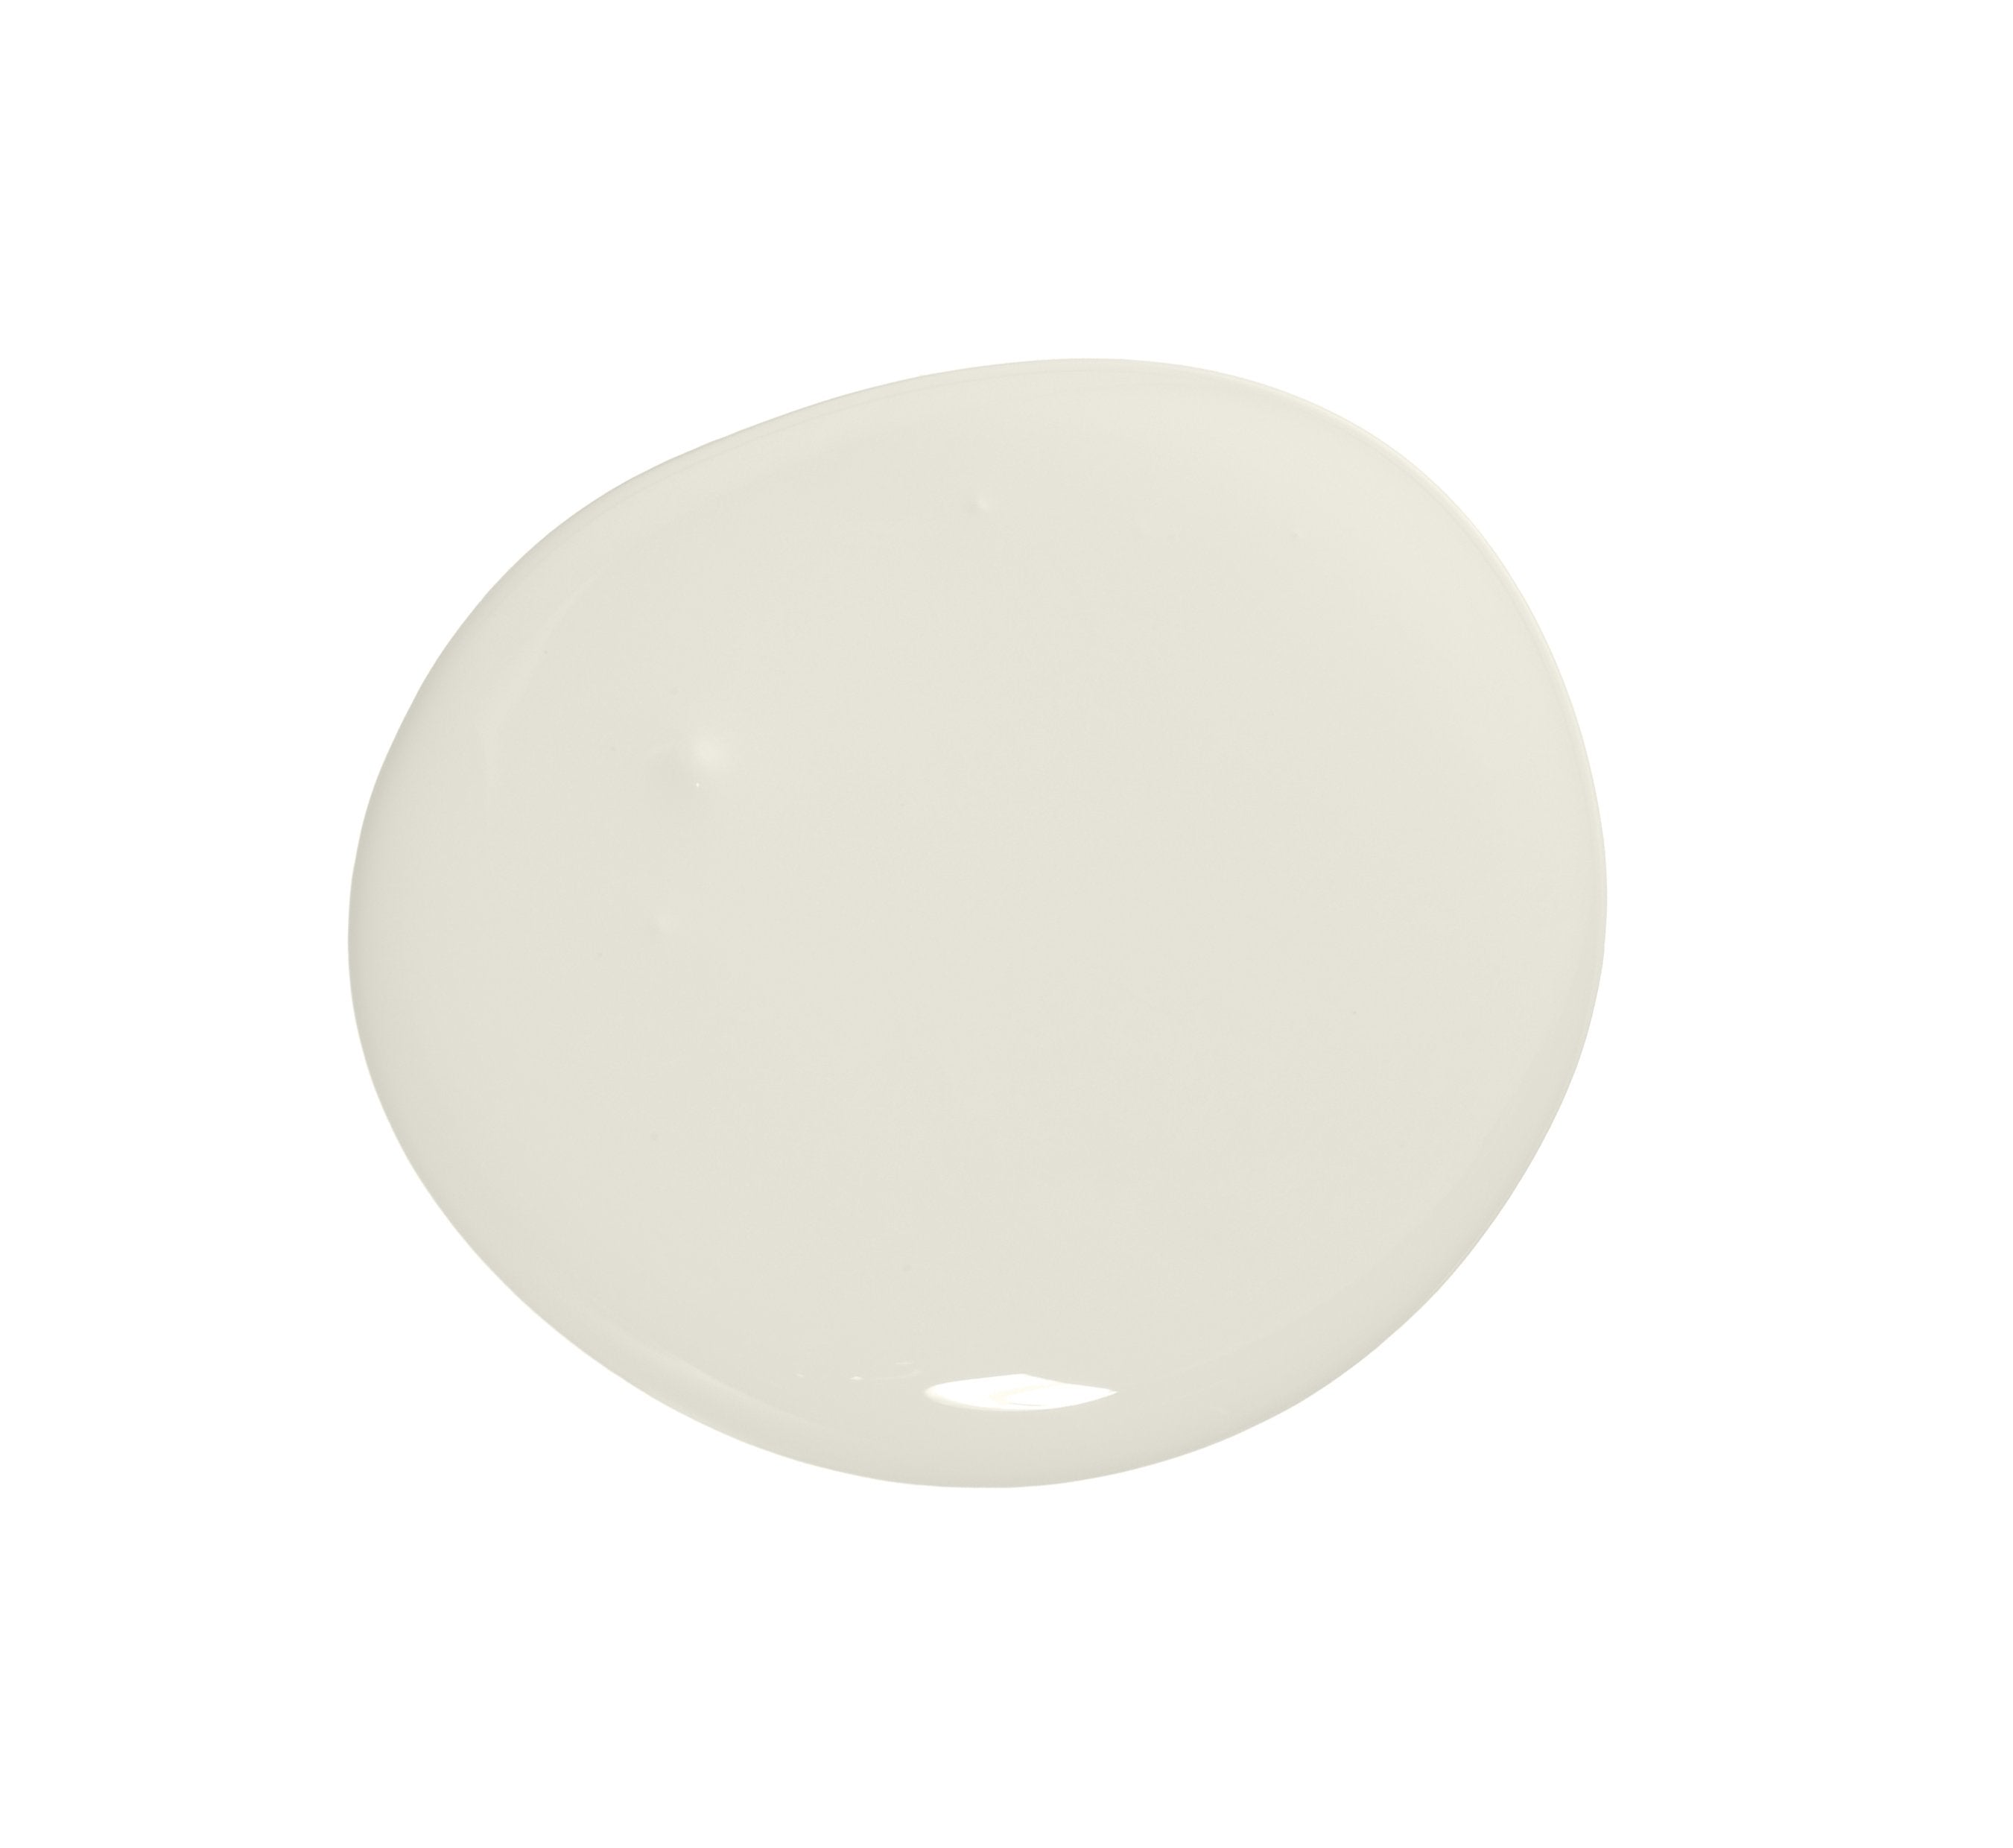 Colourtrend Cherished White | Same Day Dublin and Nationwide Paint in Ireland Delivery by Weirs of Baggot Street - Official Colourtrend Stockist